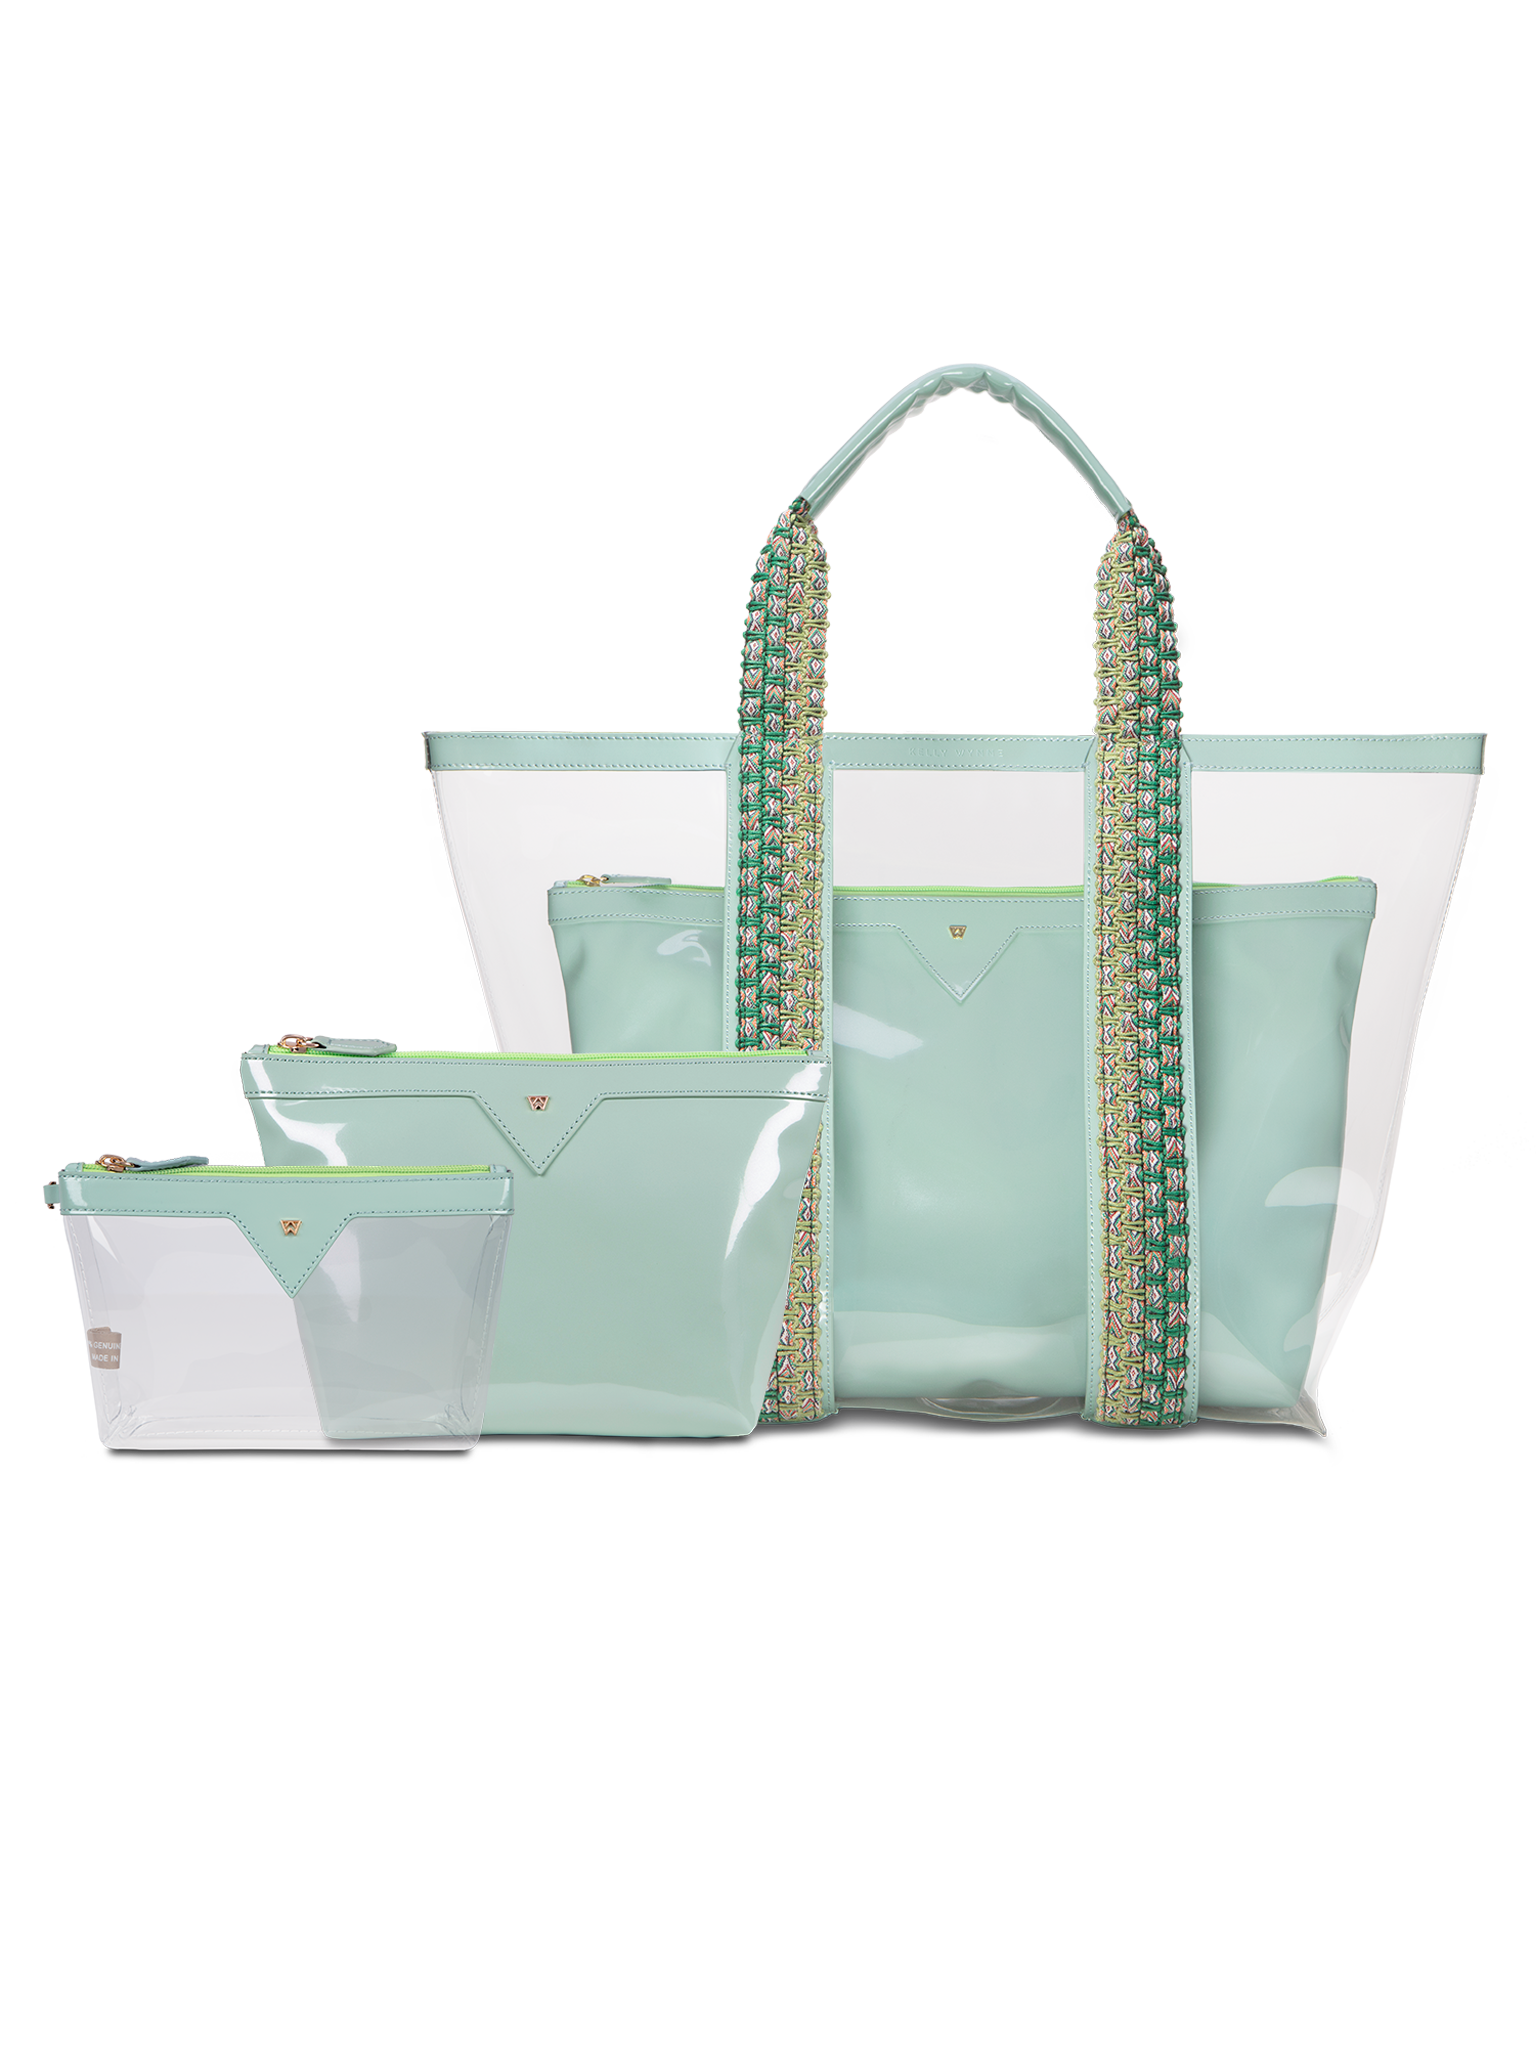 Don’t forget to add on our matching accessories in seafoam, to help keep you perfectly organized for all your vacation fun 